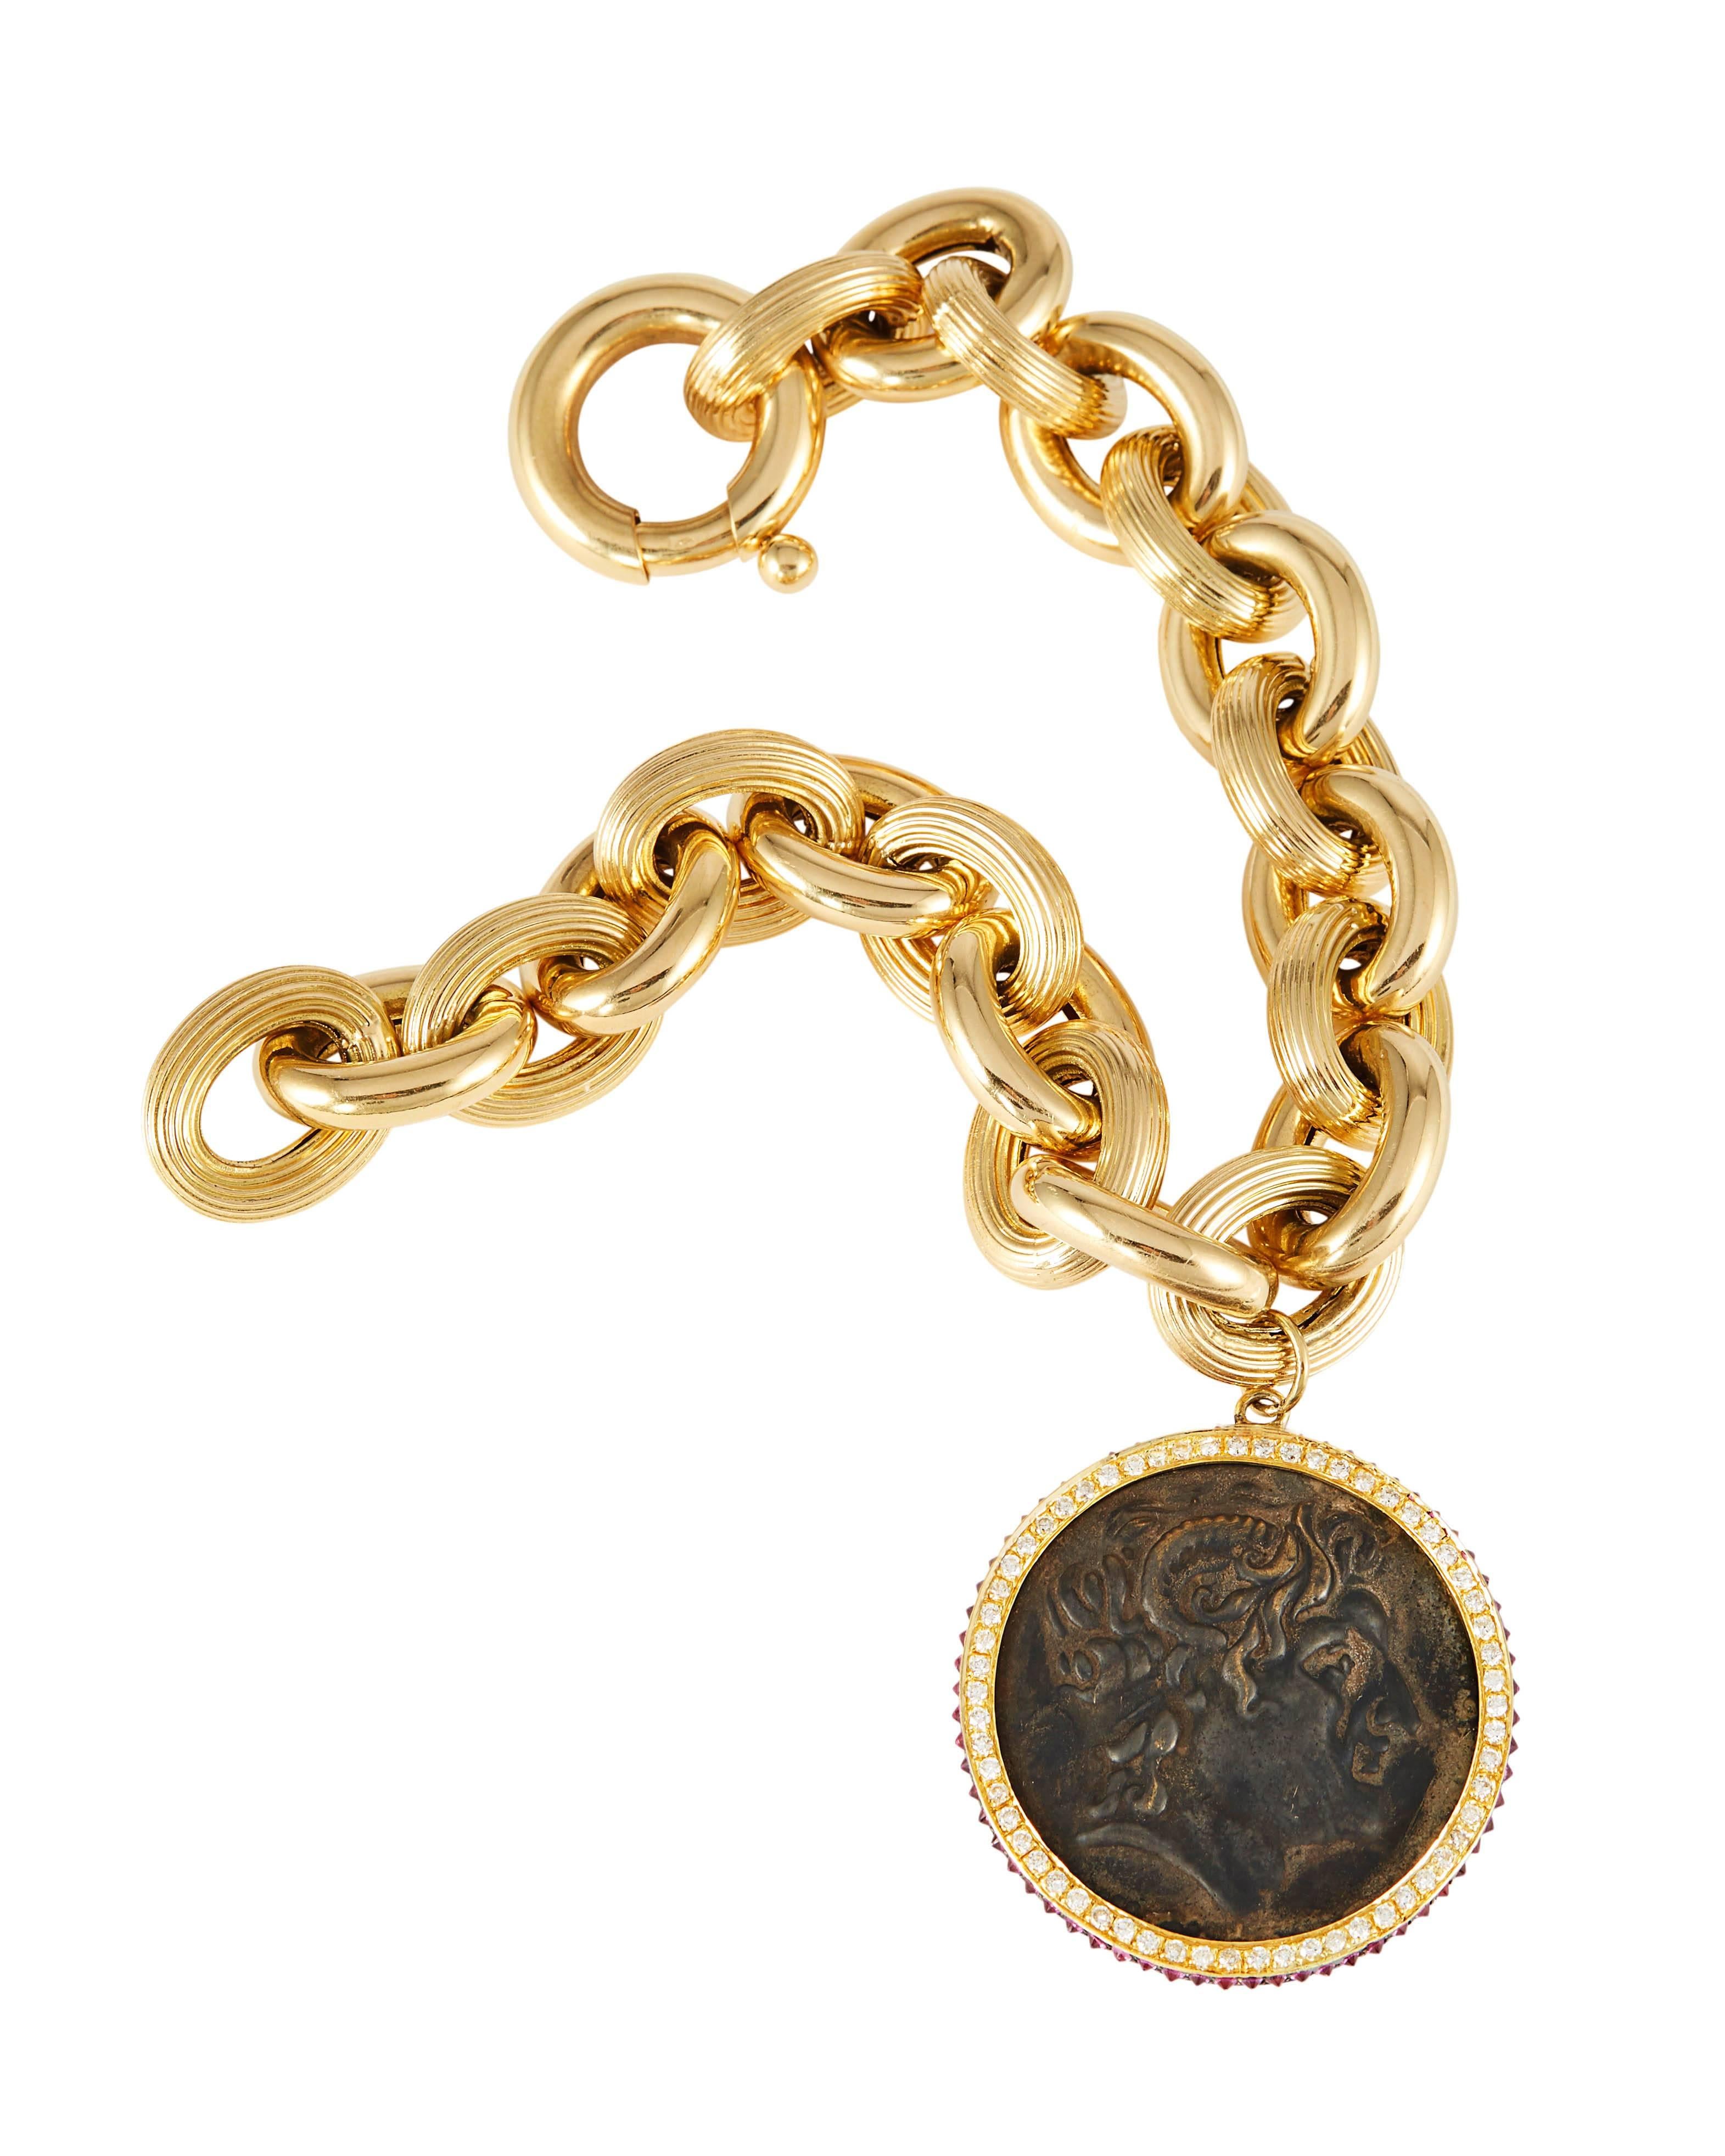 Classical Roman SAM.SAAB Roman Coin Bracelet and Yellow Gold Chain For Sale